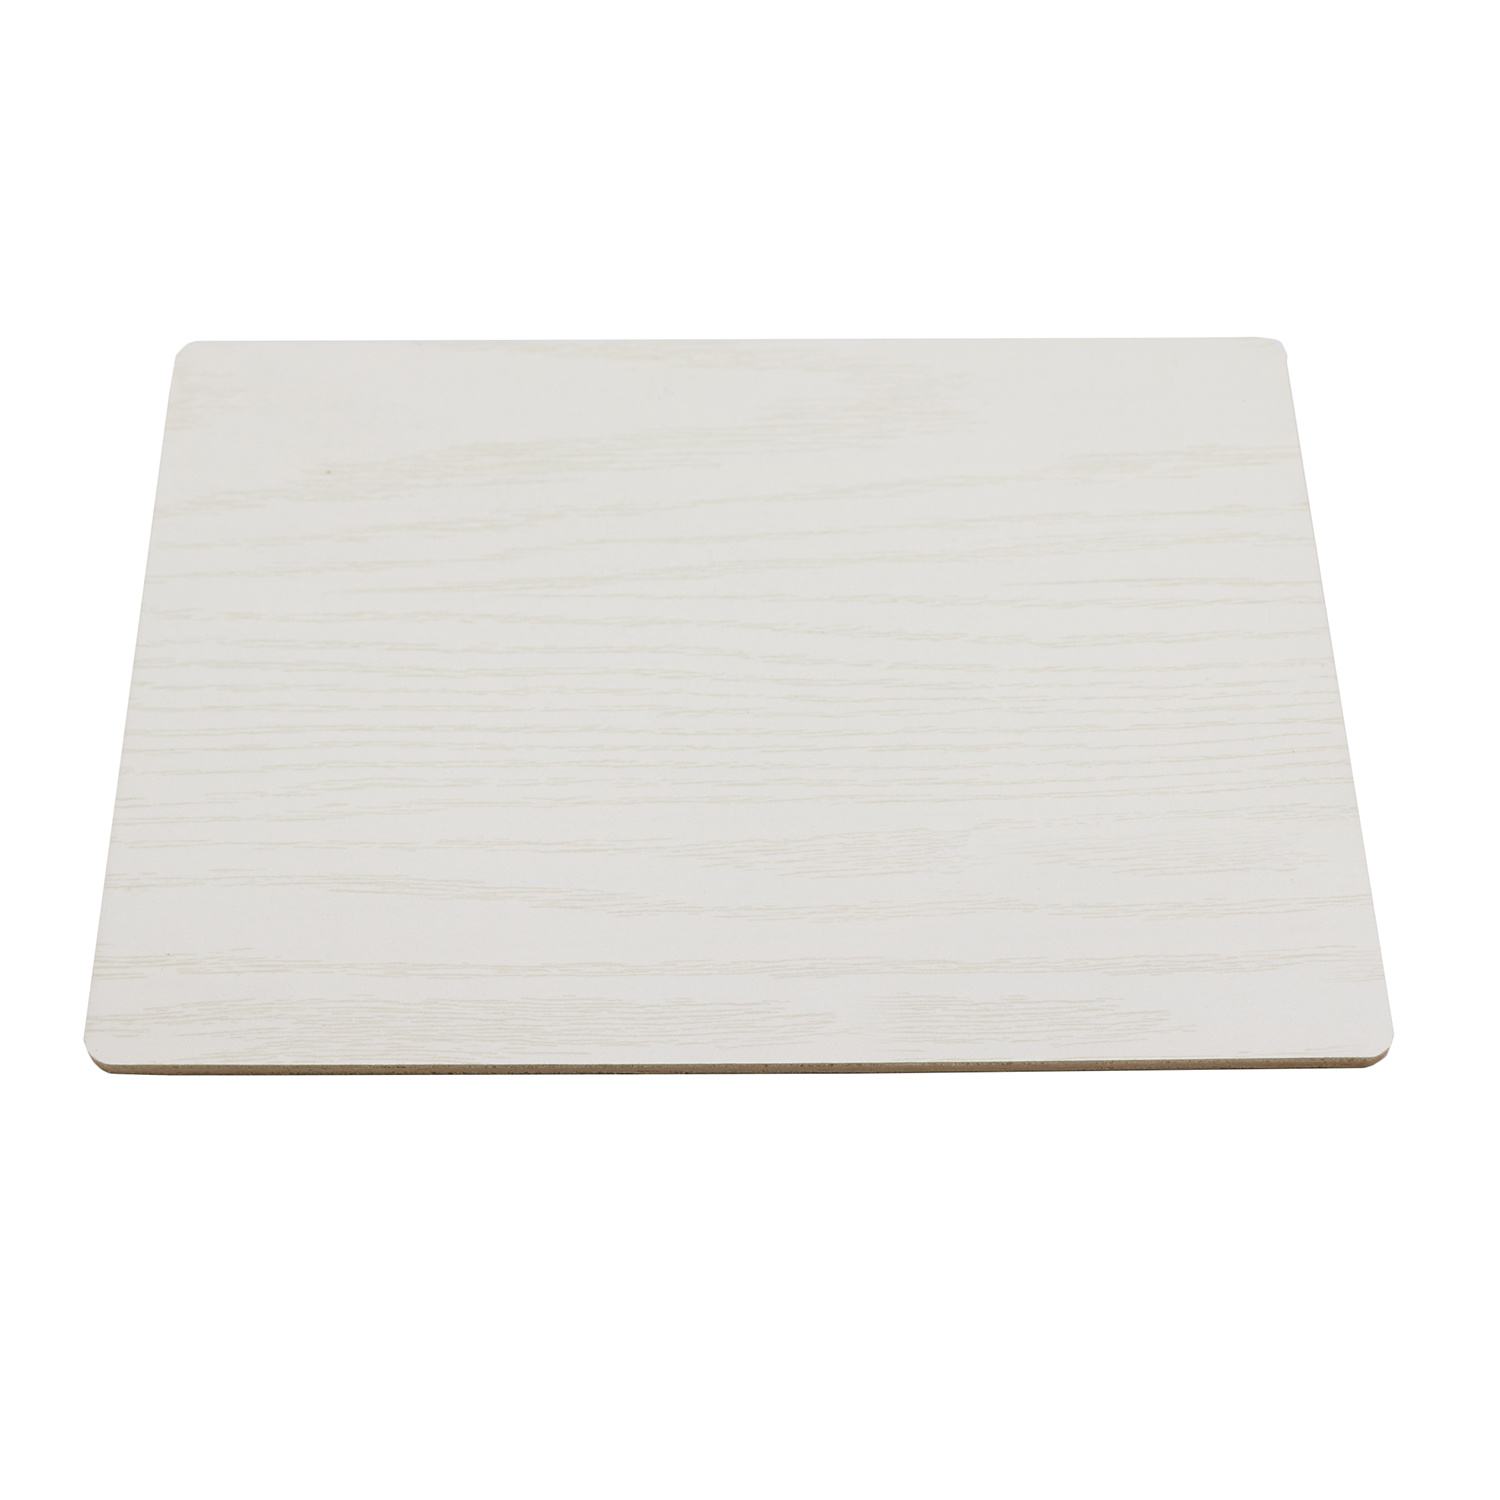 Fancy Wood Grain Faced Plywood Melamine Film Faced Ply Wood Board for Furniture